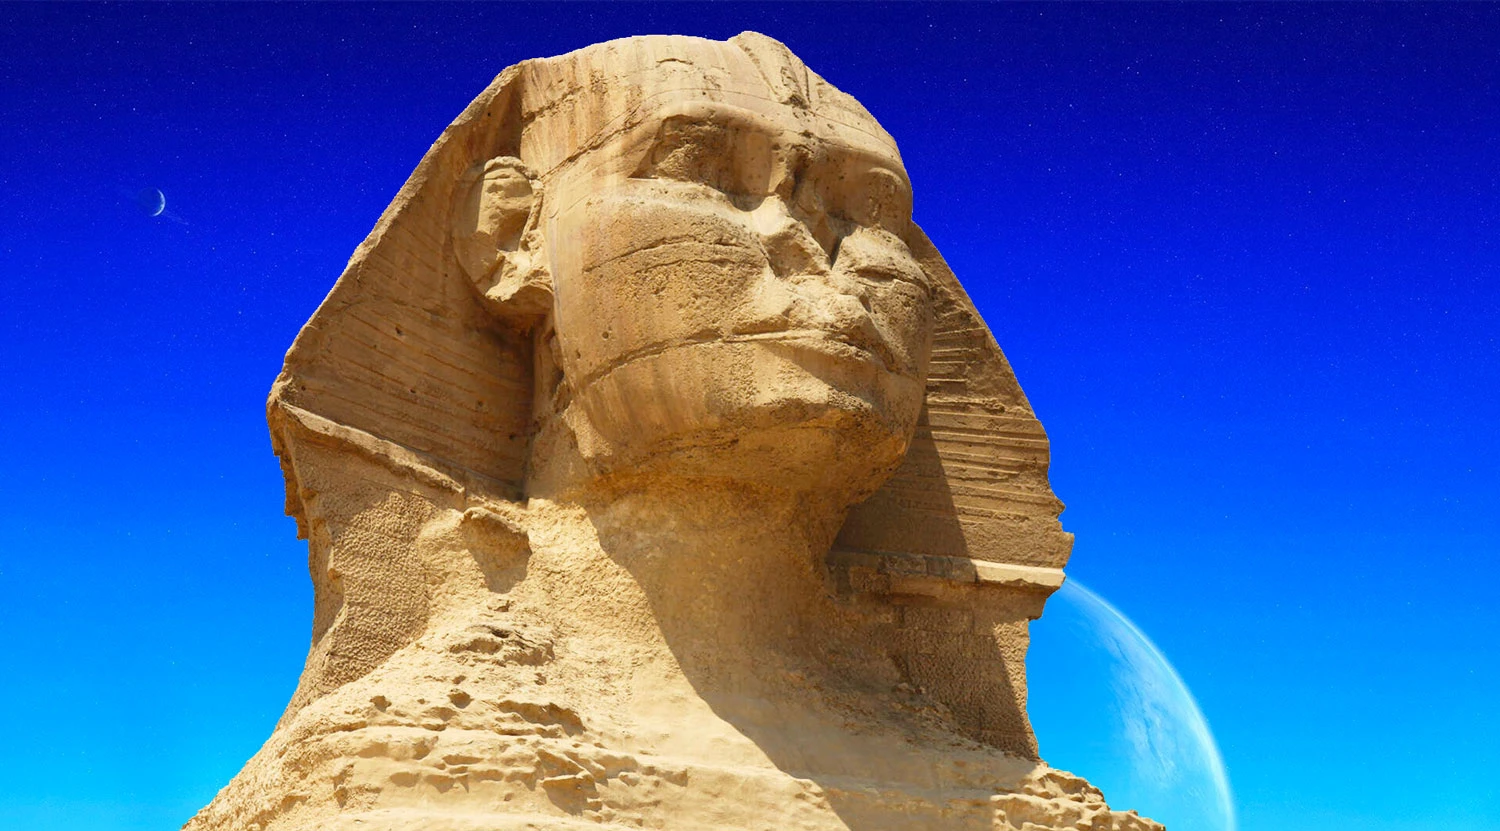 Pyramids of Giza Tour – Discover the Ancient Wonders